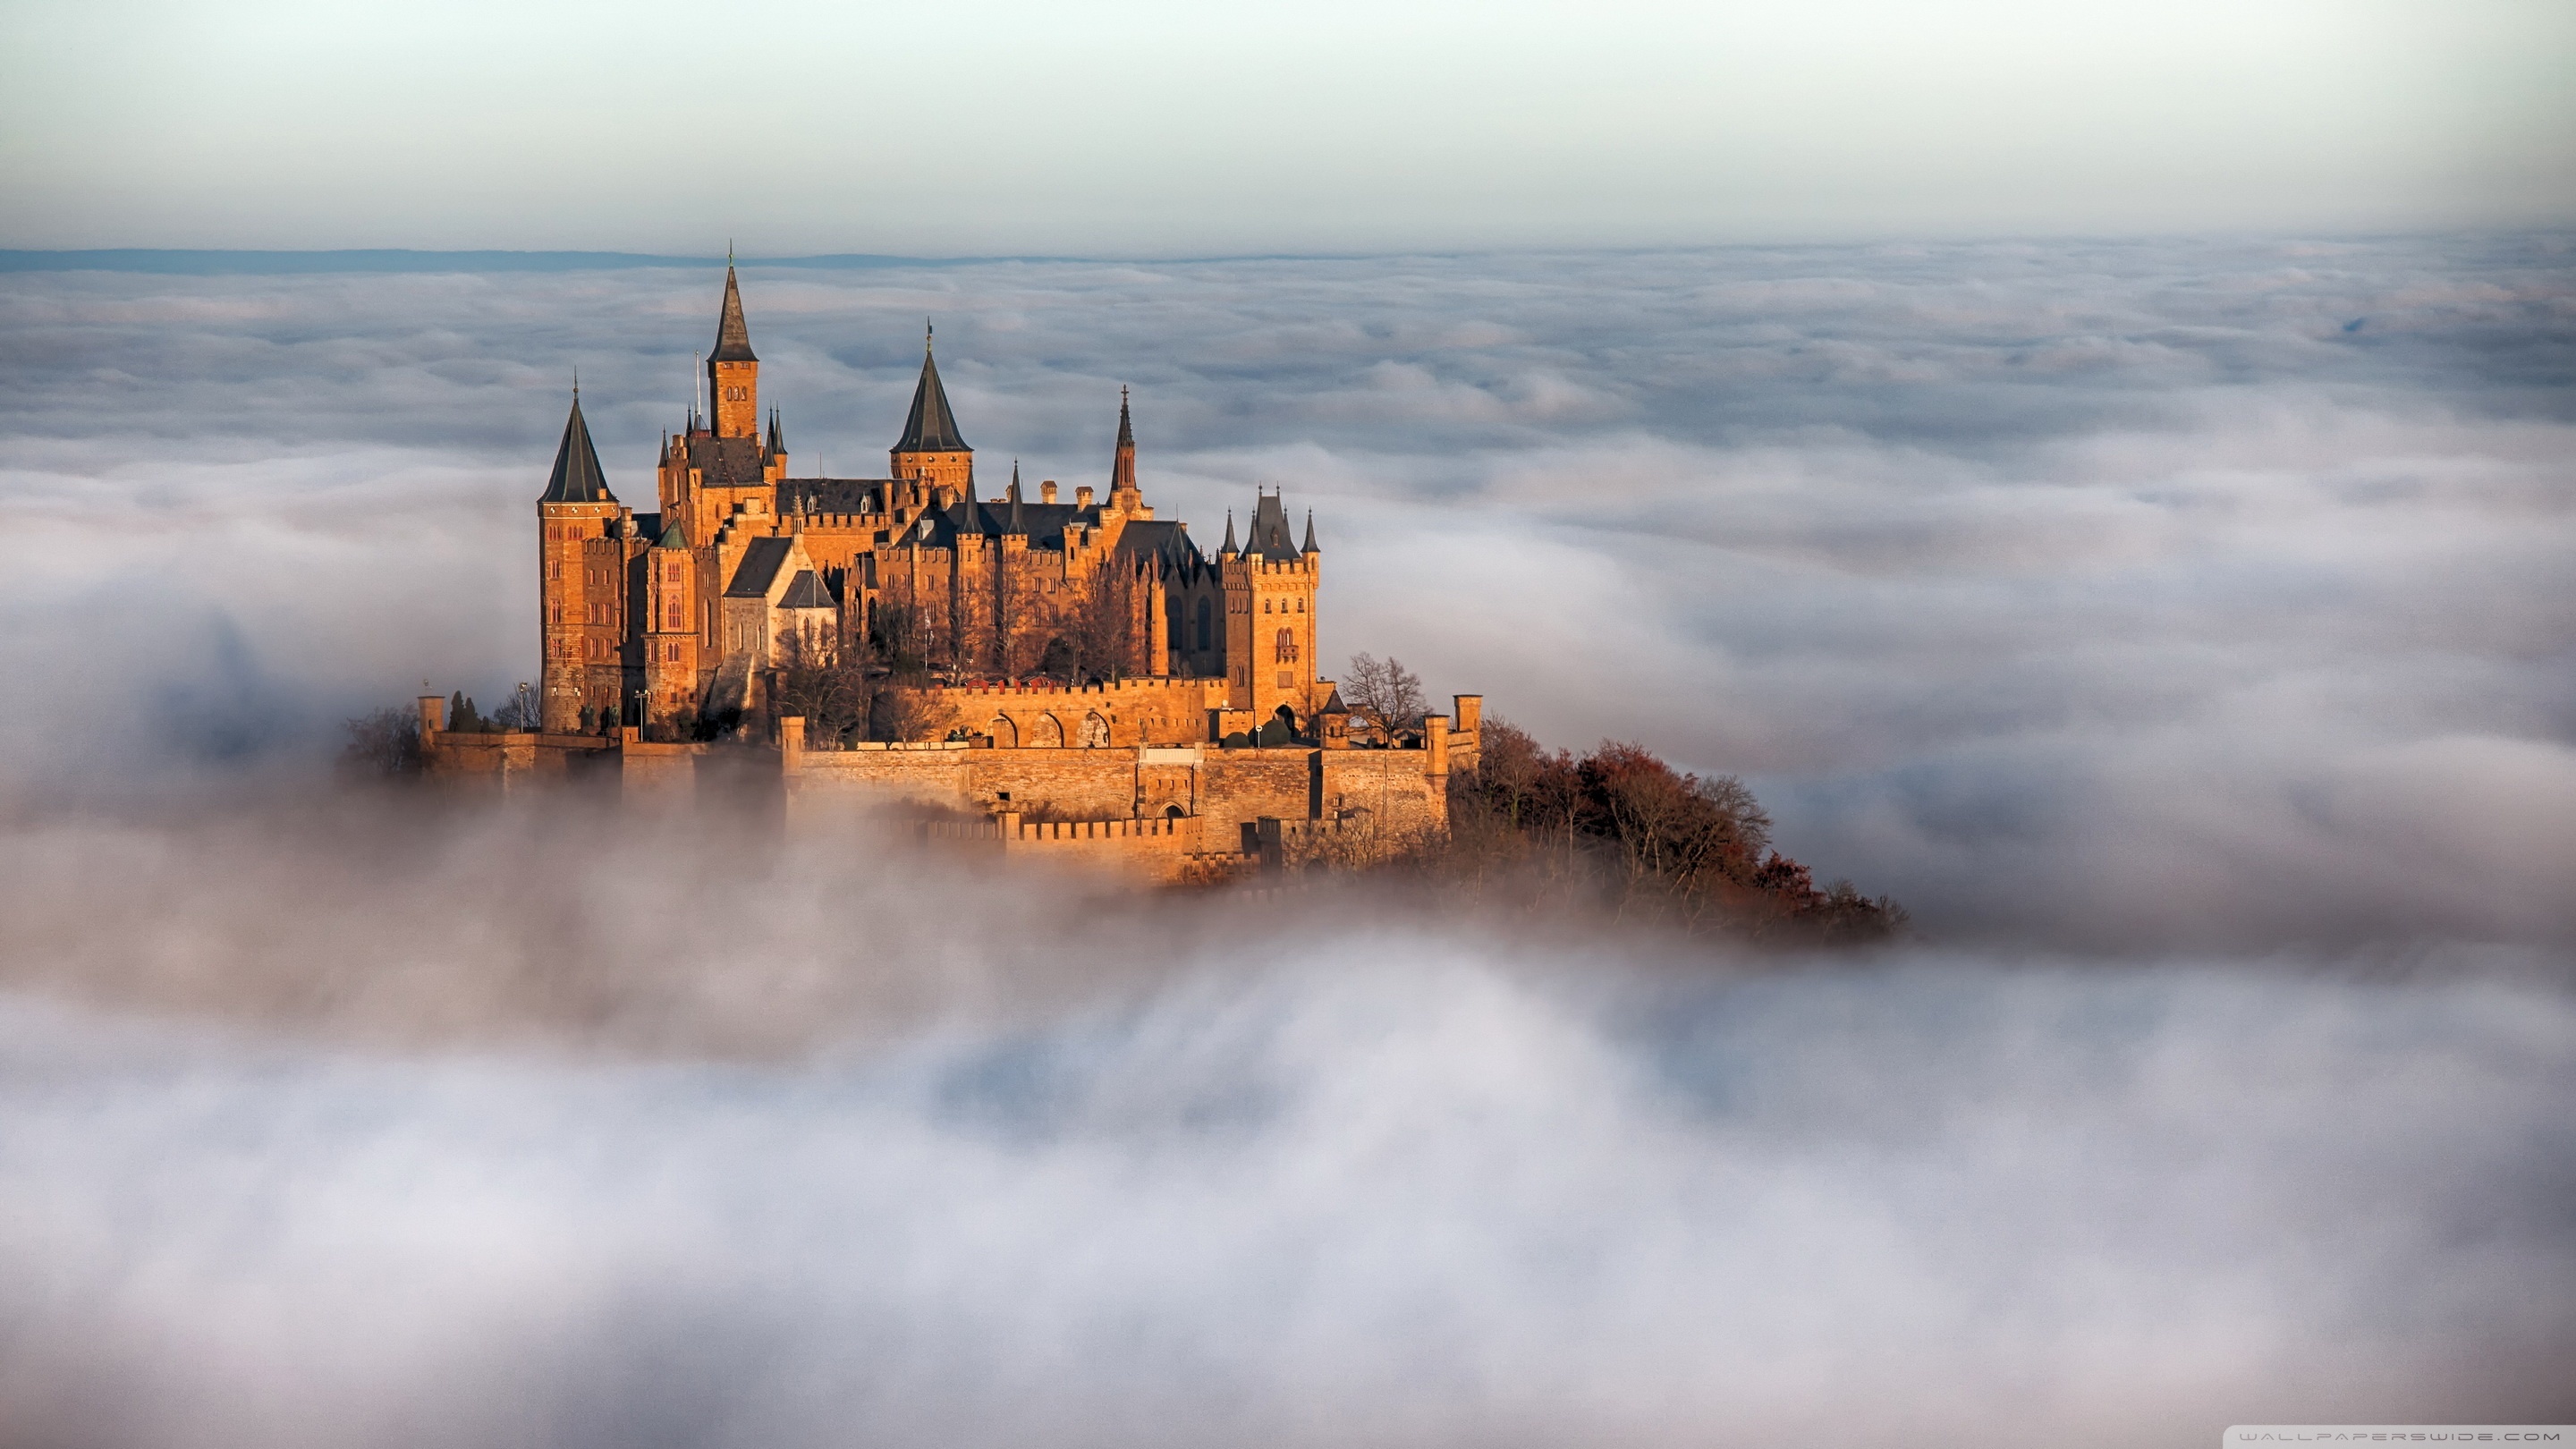 Castle: Burg Hohenzollern, located in the German state of Baden-Württemberg. 2880x1620 HD Wallpaper.